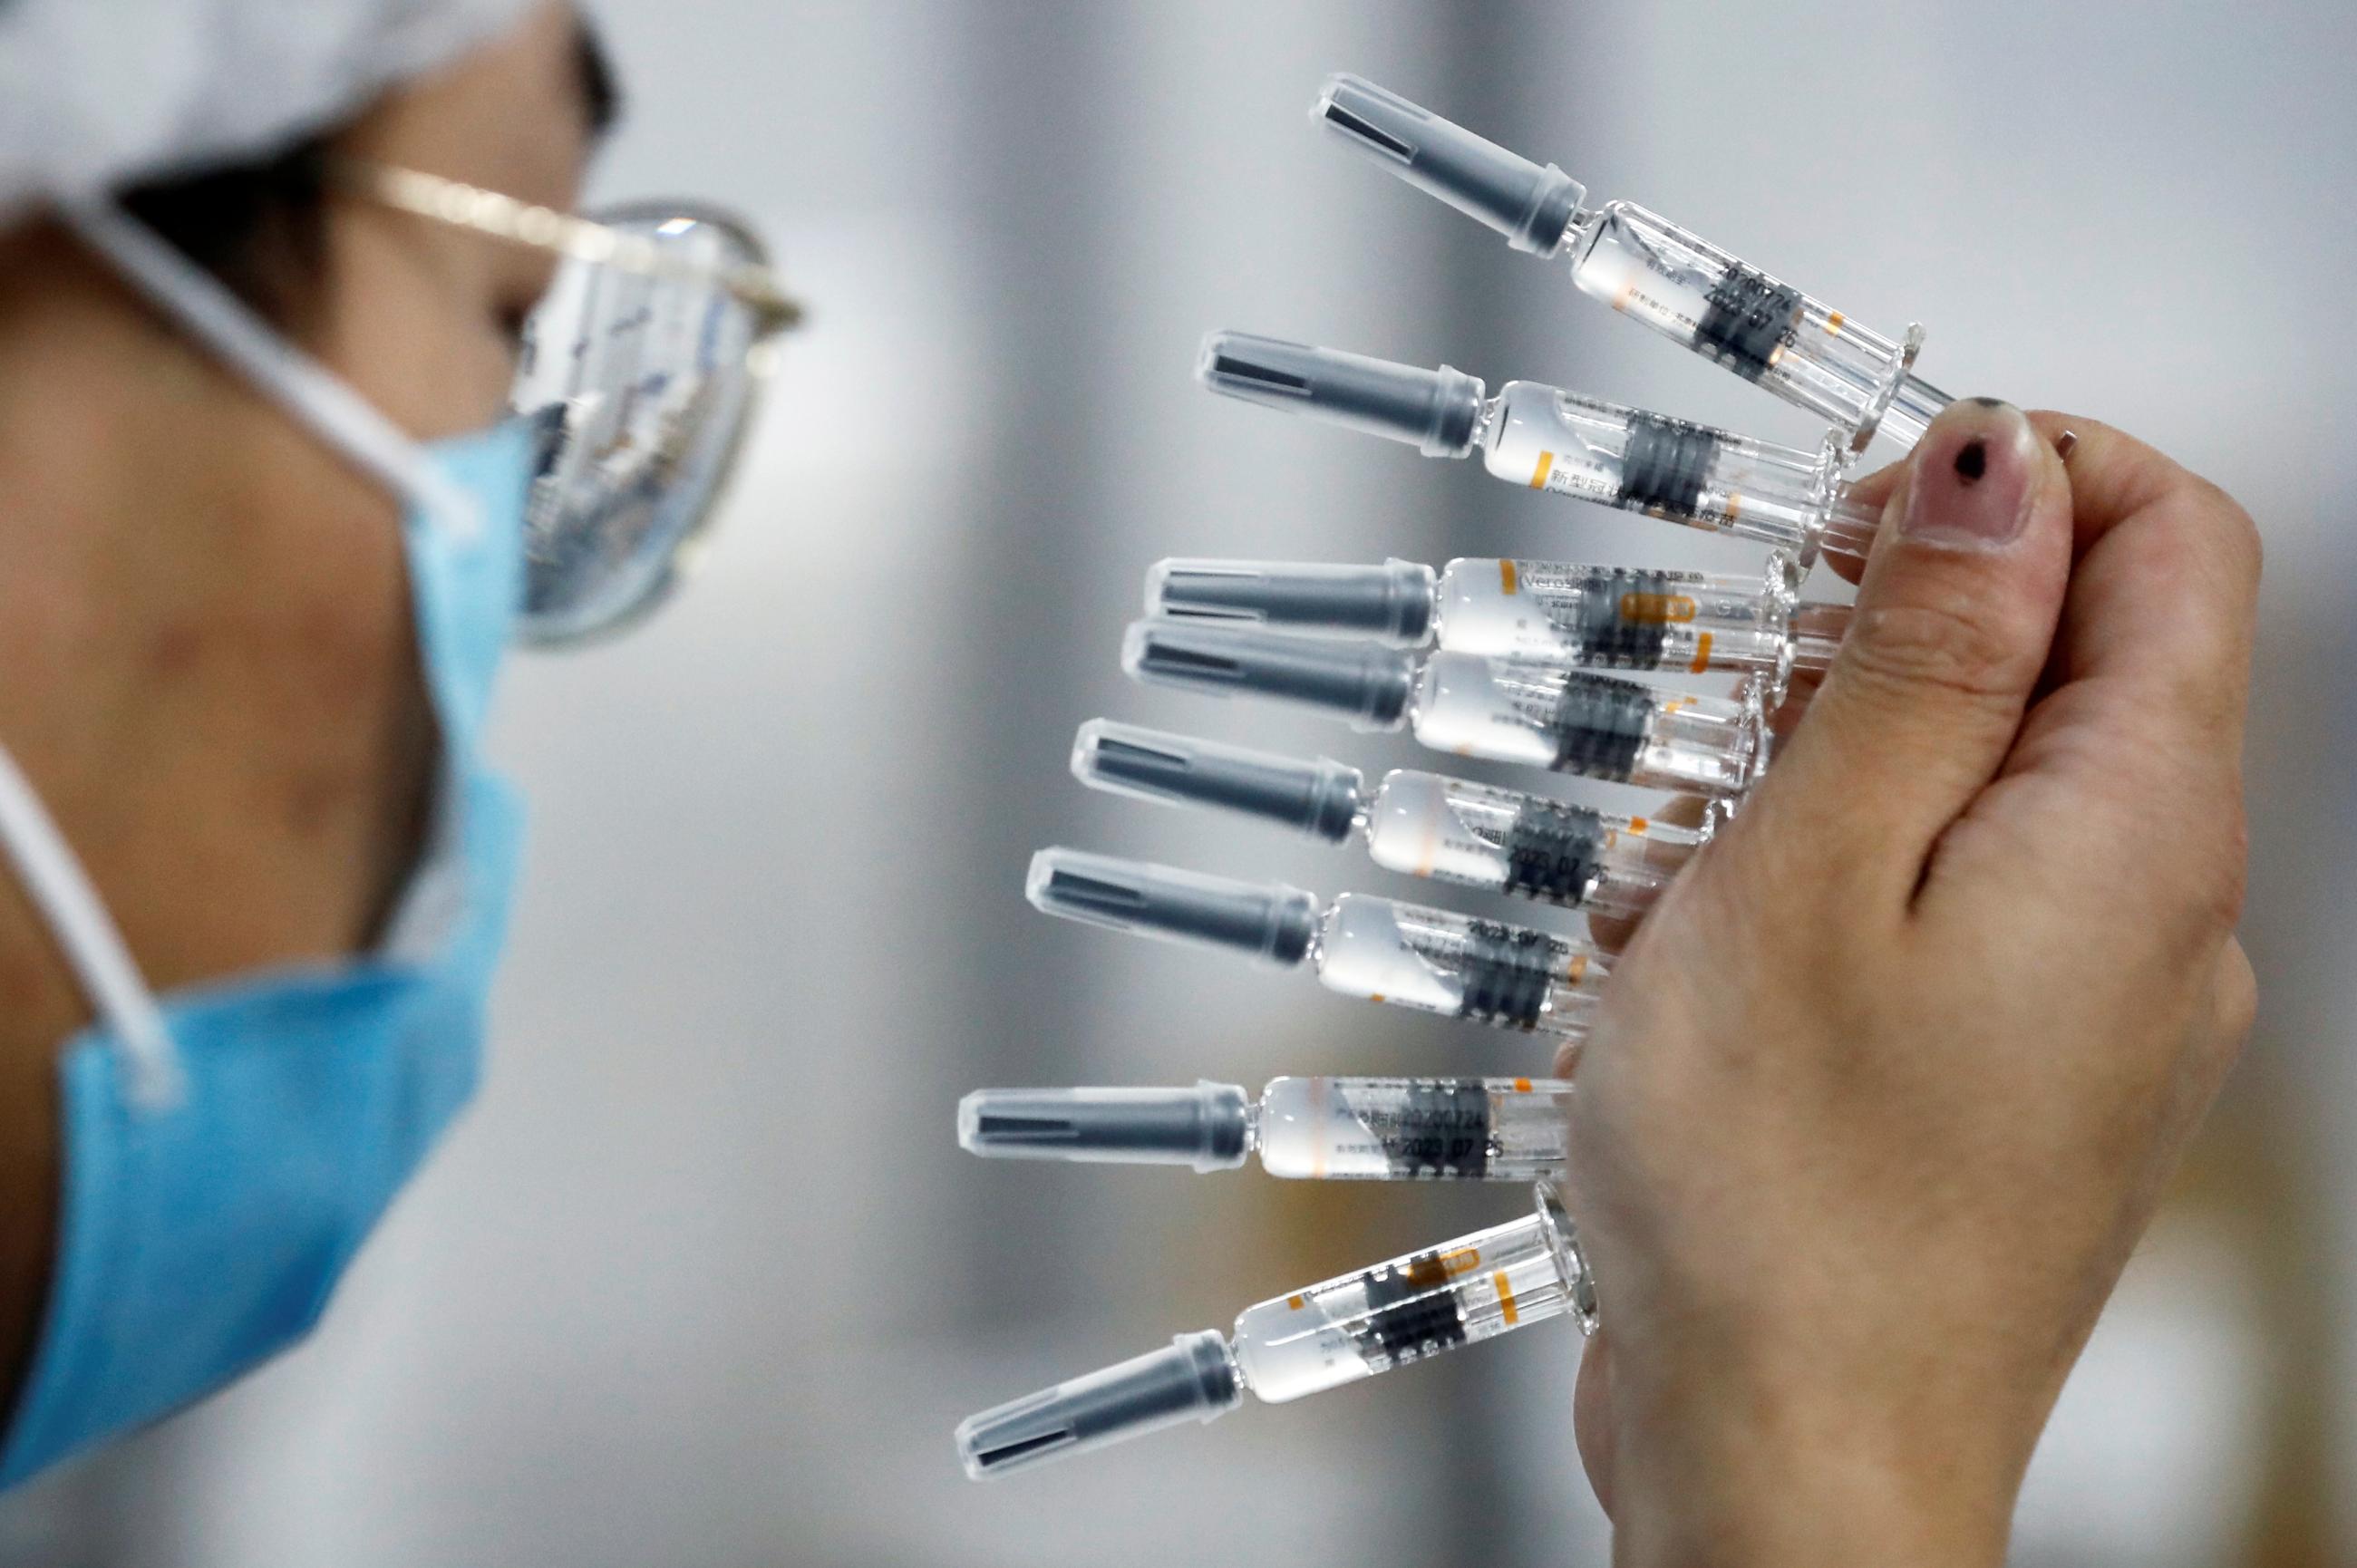 A worker performs a quality check in the packaging facility of Chinese vaccine maker Sinovac Biotech, developing an experimental coronavirus disease (COVID-19) vaccine, during a government-organized media tour in Beijing on September 24, 2020.